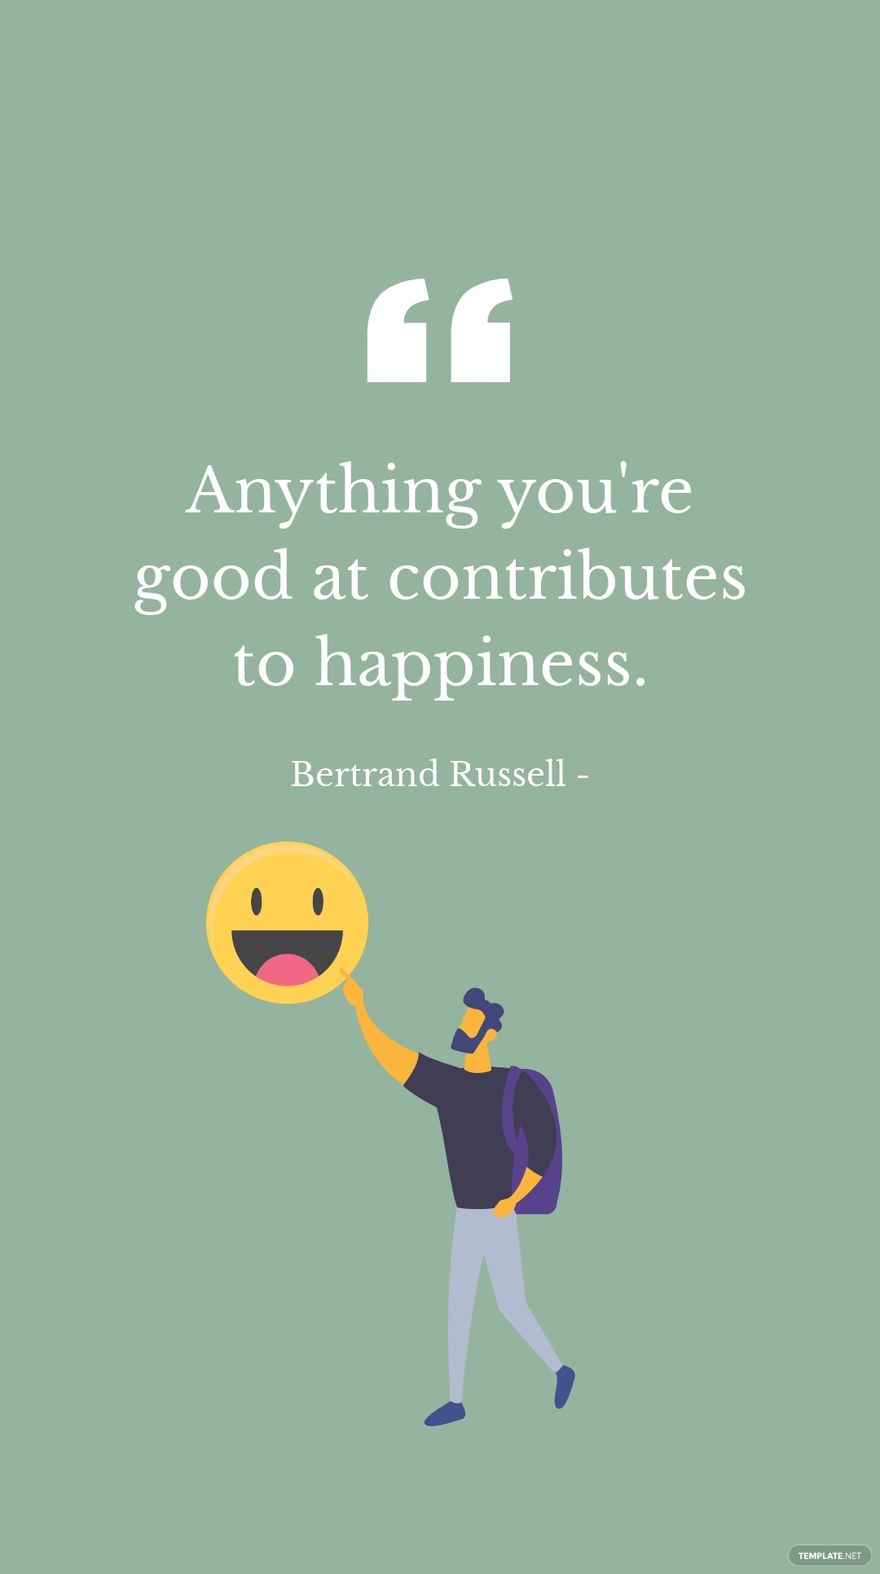 Free Bertrand Russell - Anything you're good at contributes to happiness.